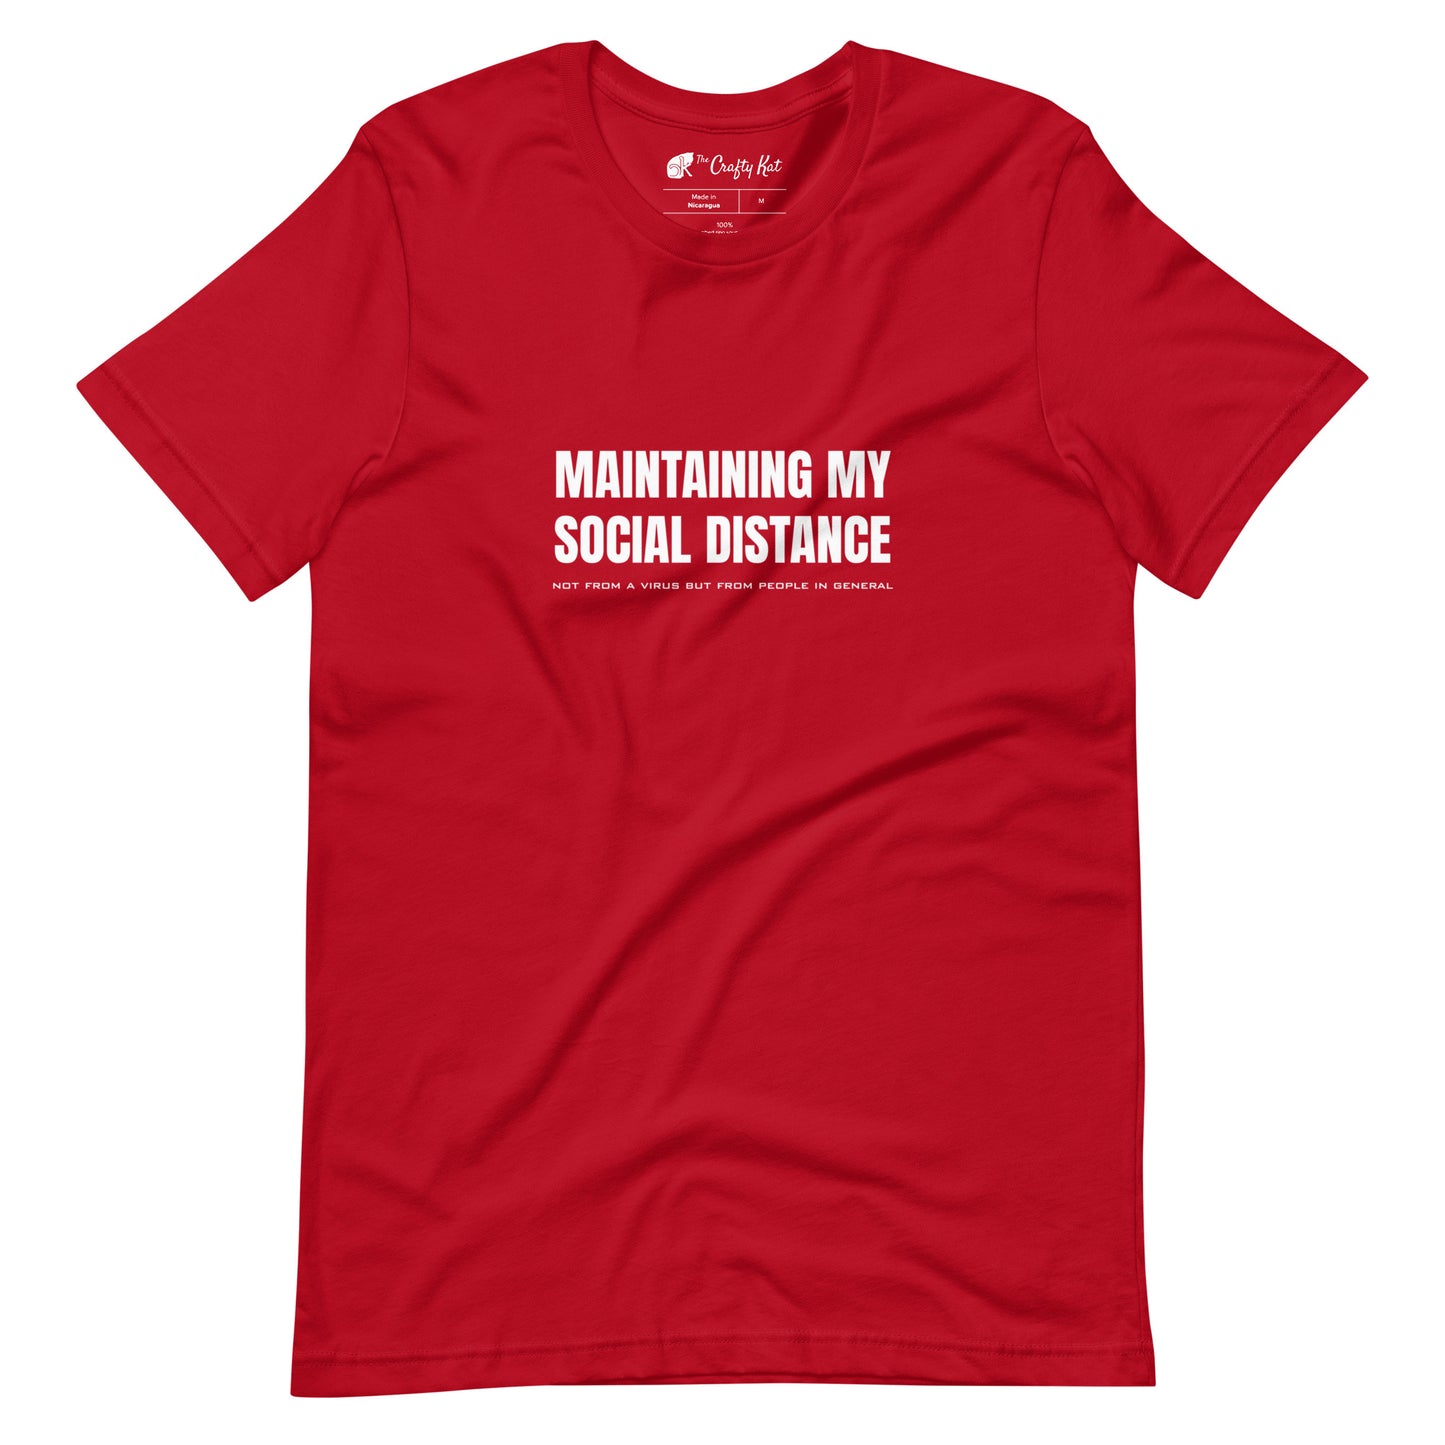 Red t-shirt with white graphic: "MAINTAINING MY SOCIAL DISTANCE not from a virus but from people in general"